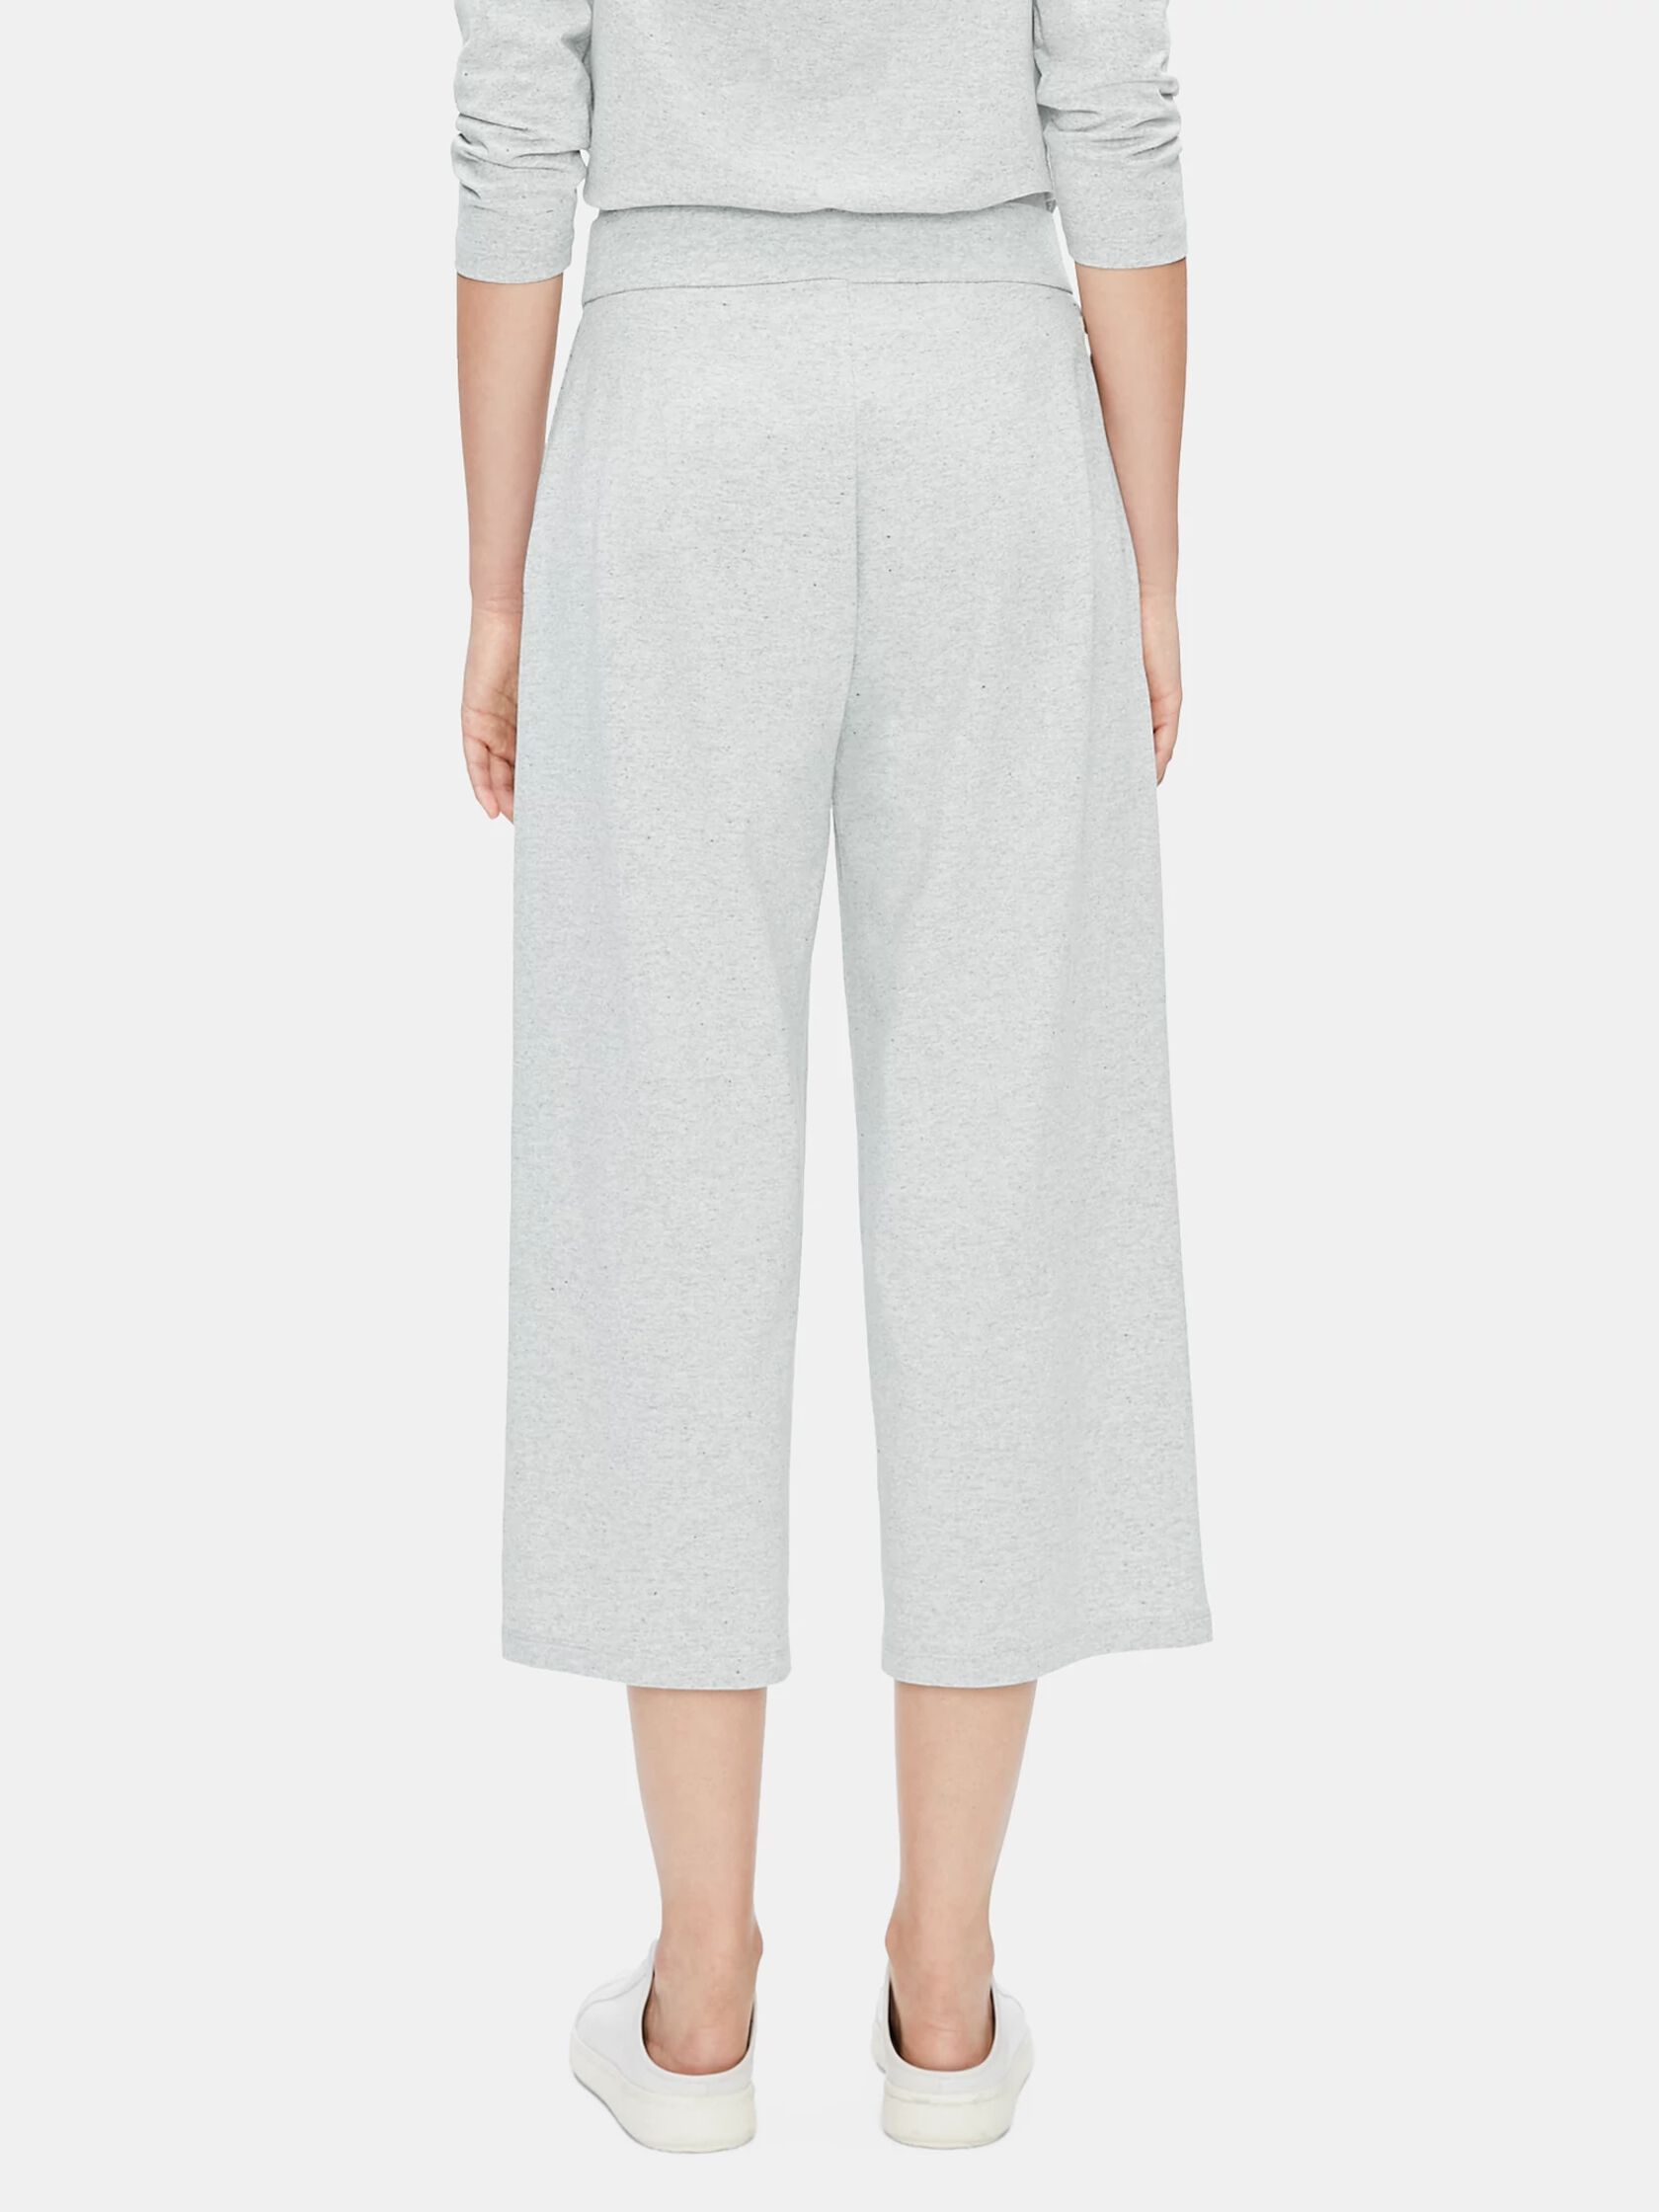 Organic Cotton Speckle Knit Wide-Leg Pant | EILEEN FISHER